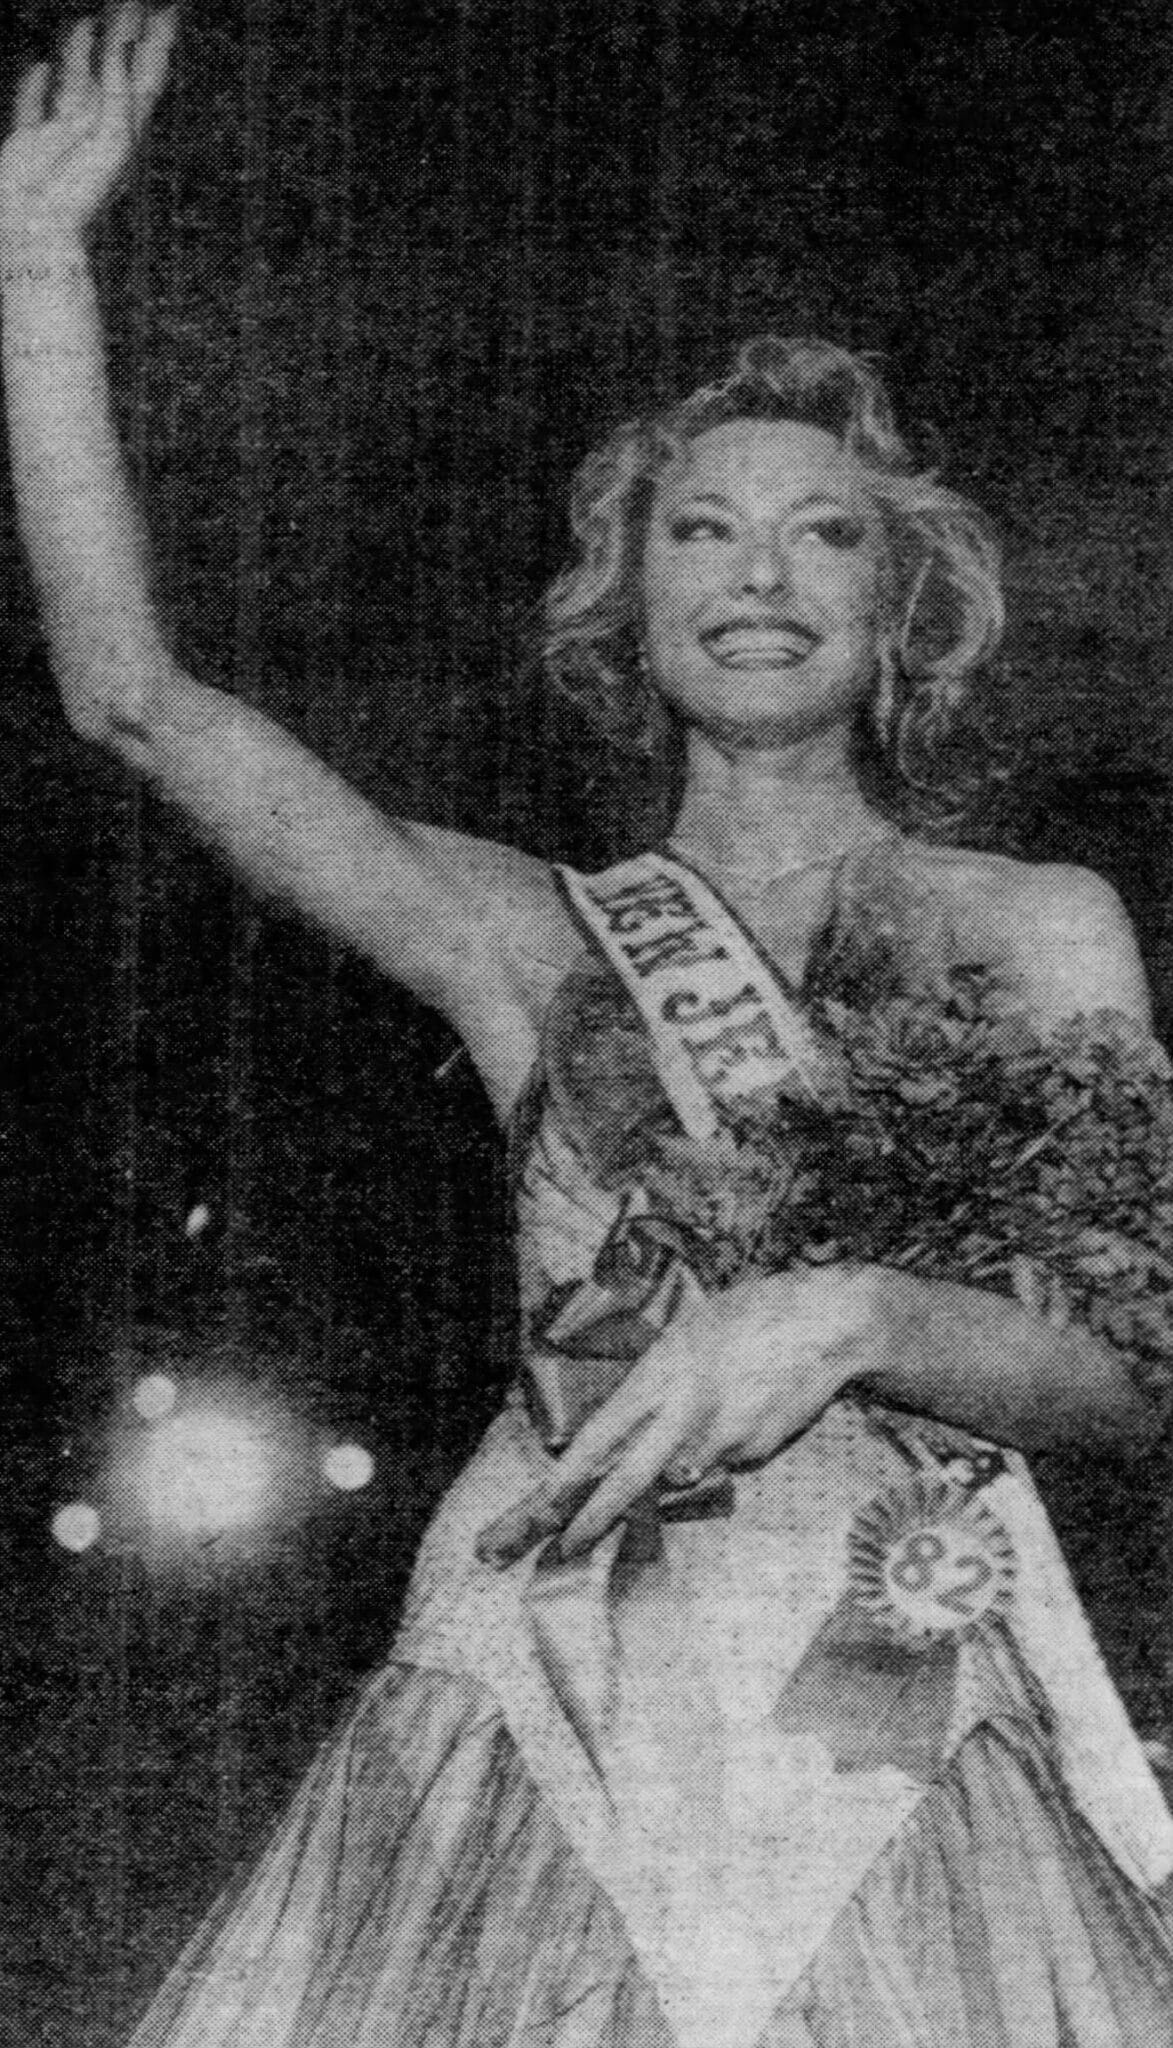 Diane Everett Qualter is crowned Miss New Jersey USA 1984